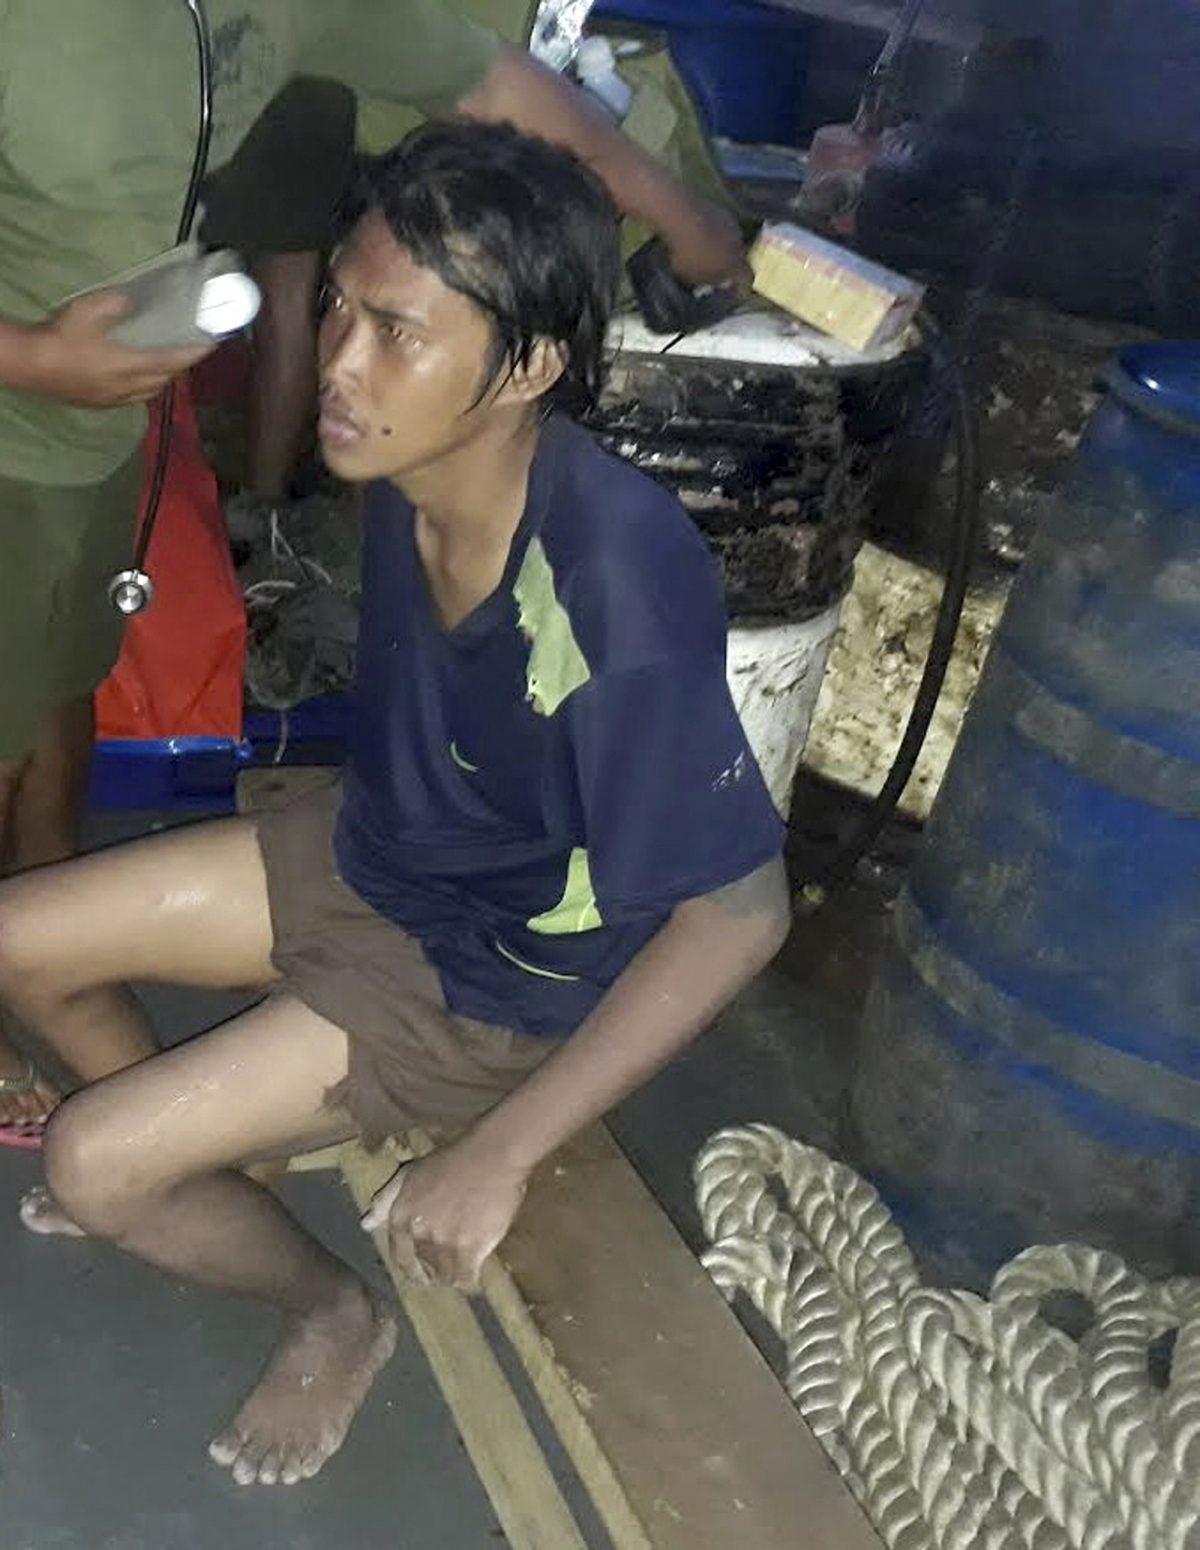 Indonesian hostage Heri Ardiansyah sits on a cot inside a Philippine Navy patrol boat following his rescue by Philippine troops in Simisa island, Sulu province in southern Philippines, on April 5, 2019. (WestMinCom Armed Forces of the Philippines via AP)